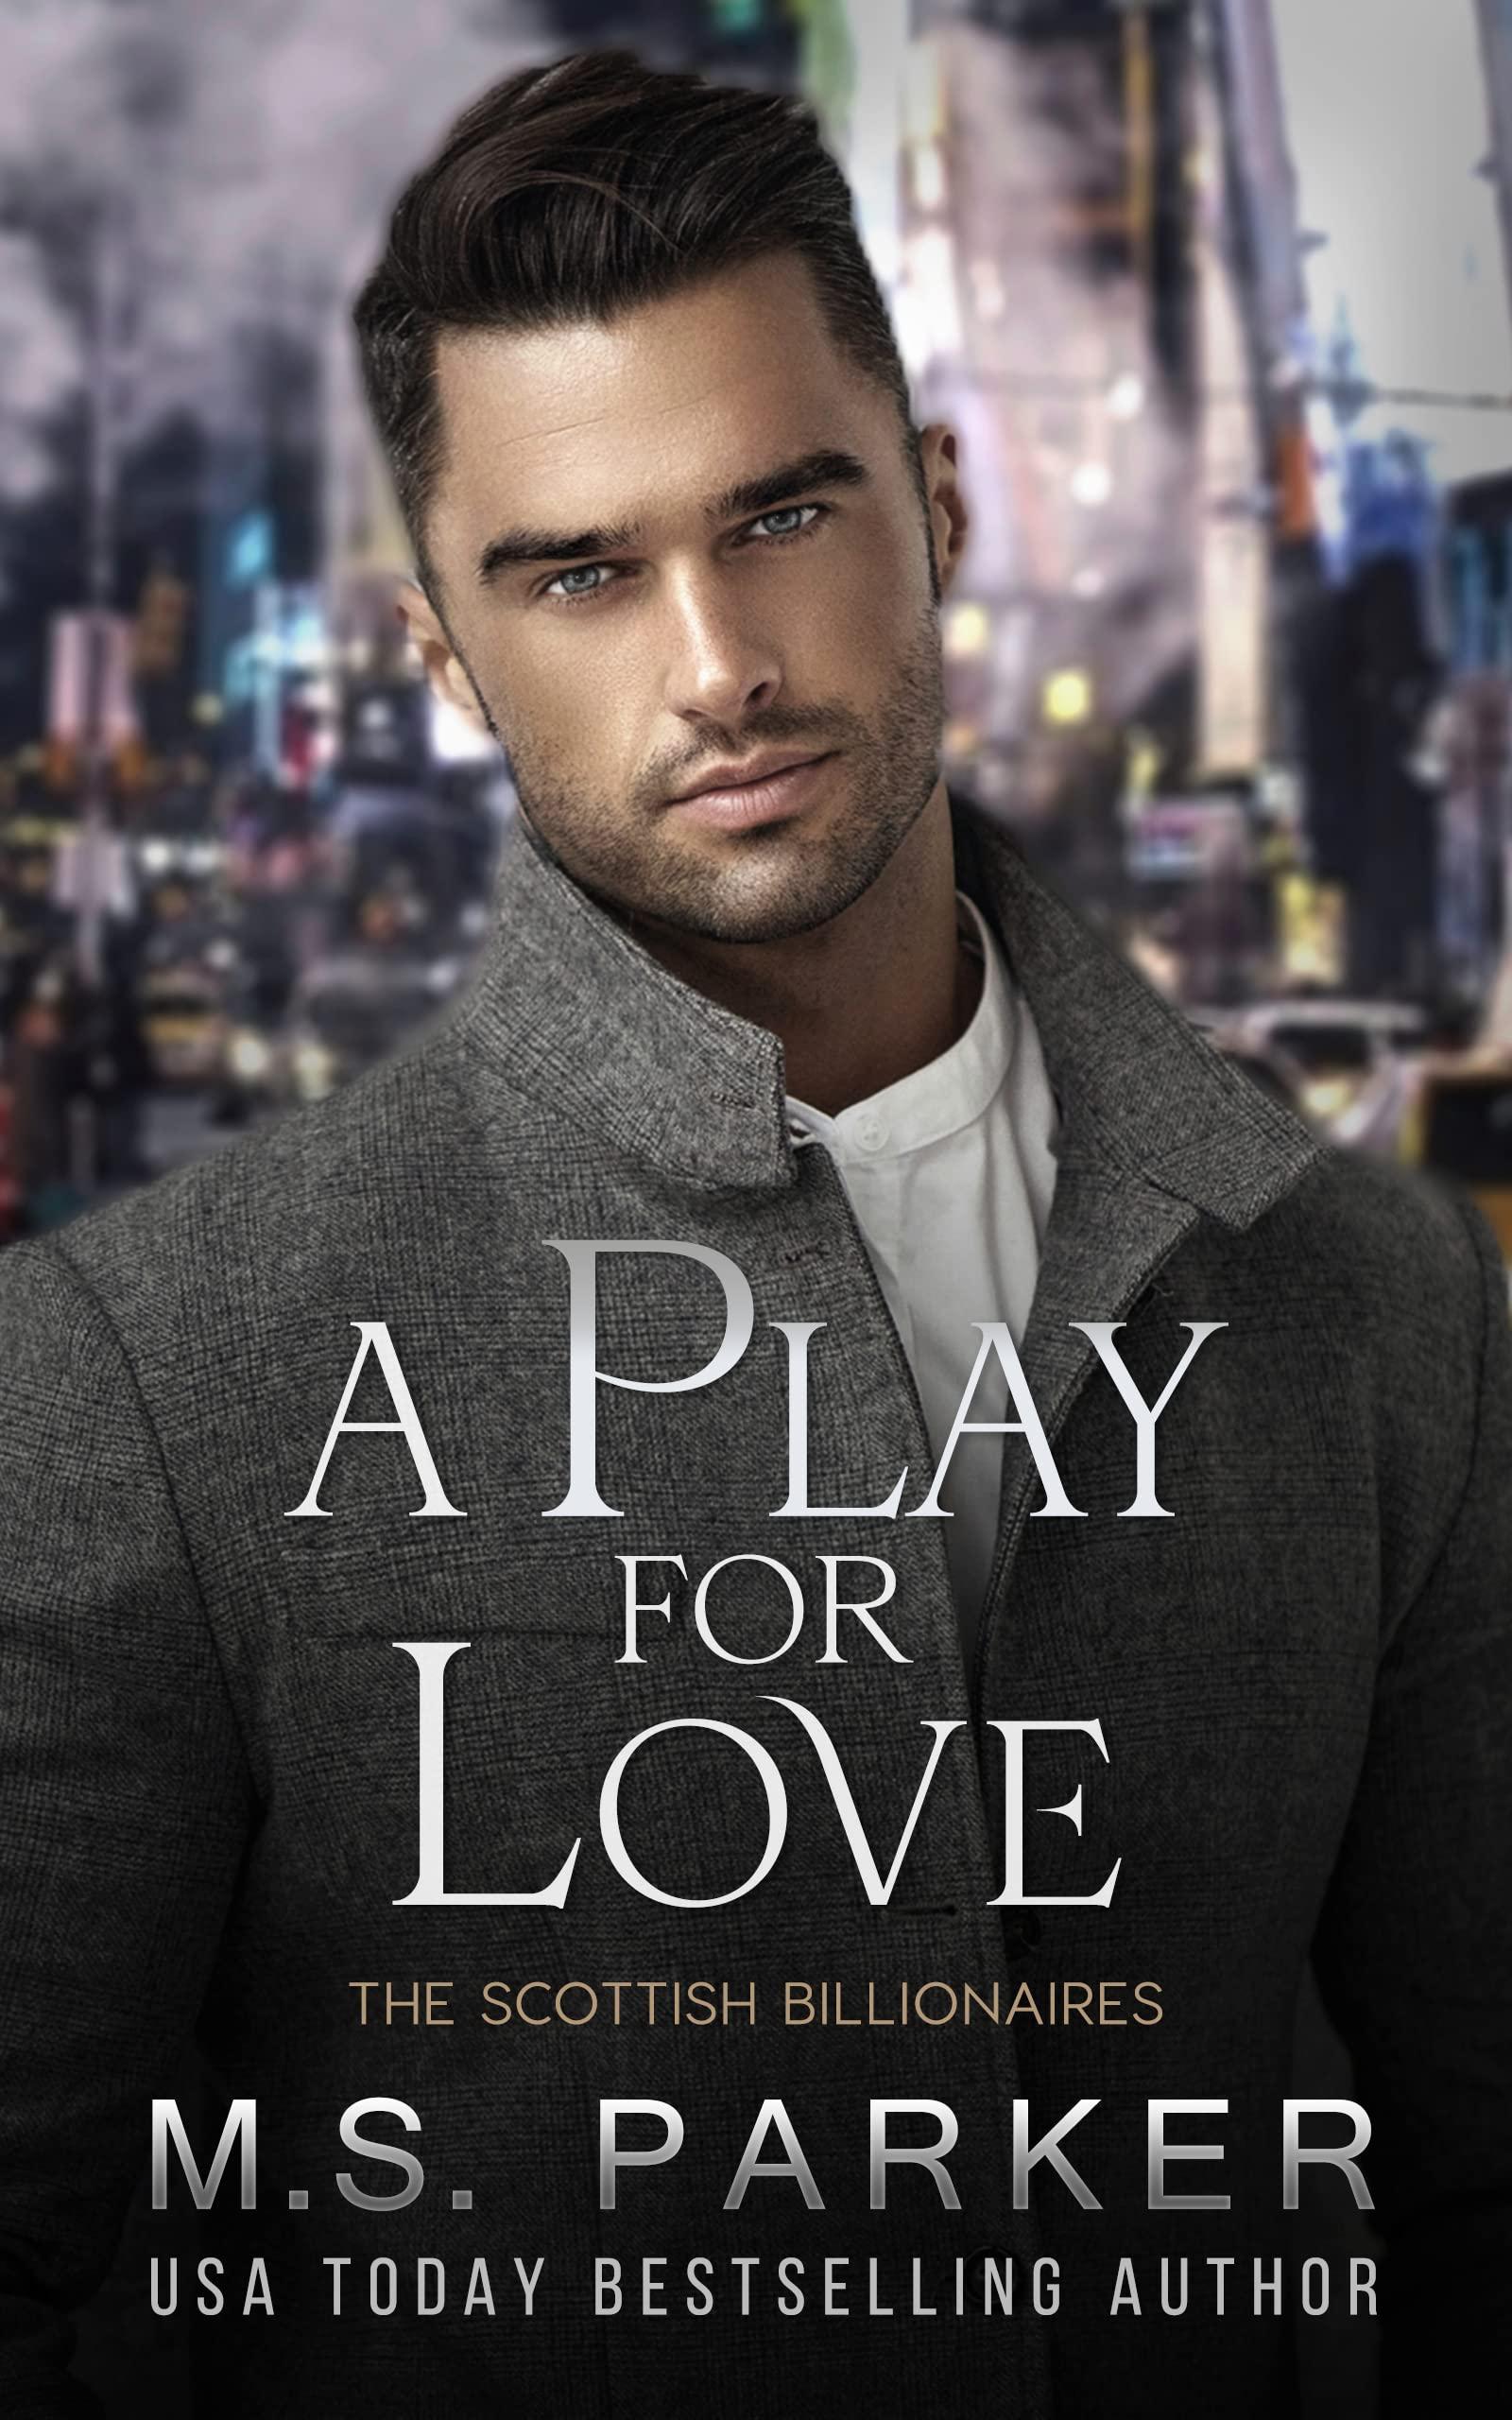 A Play for Love